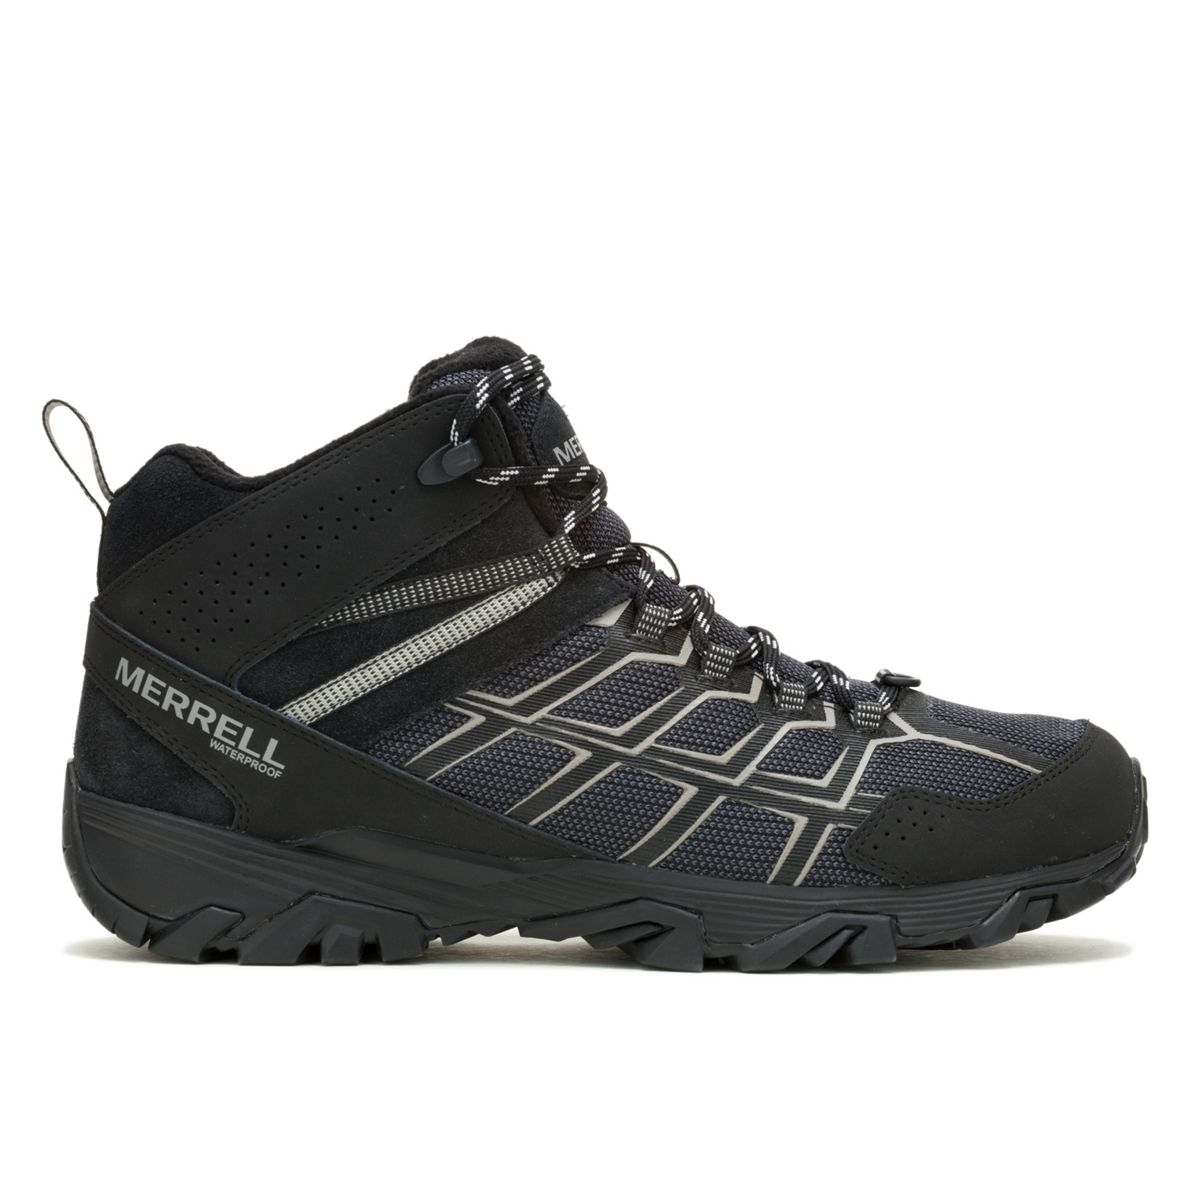 Moab FST 3 Thermo Mid Waterproof, Black/Paloma, dynamic